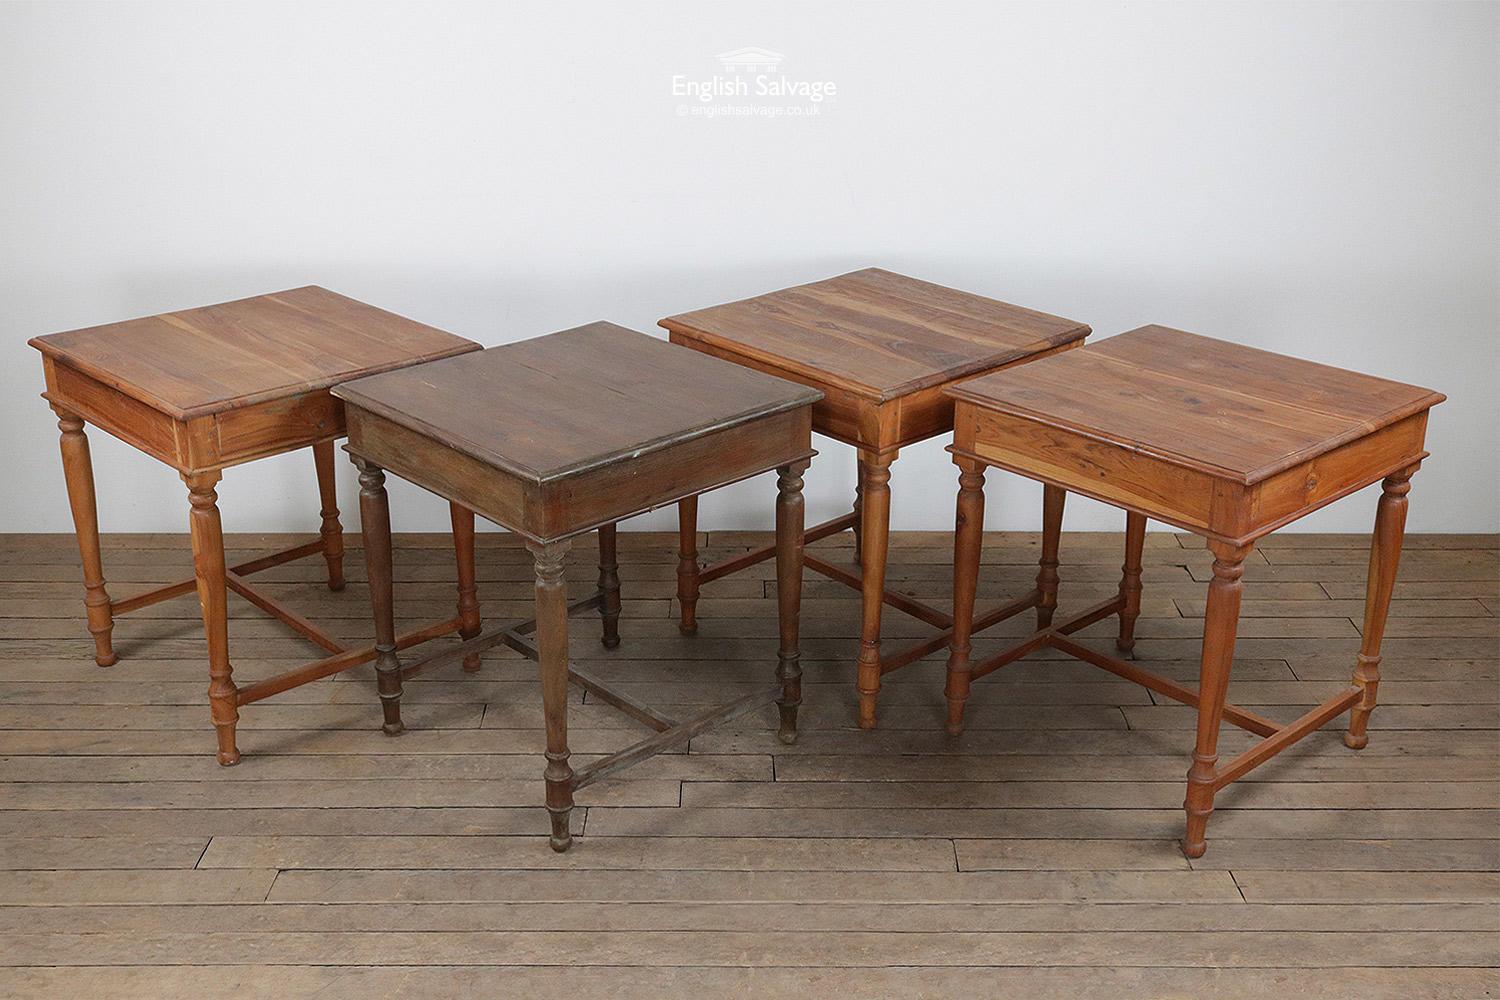 Reclaimed solid teak hardwood tables with H brace supports and nicely turned legs. Compact size so useful where space is limited. Ideal as two-seat tables in a small kitchen, café or bistro. Wood is a natural product, so each have their own